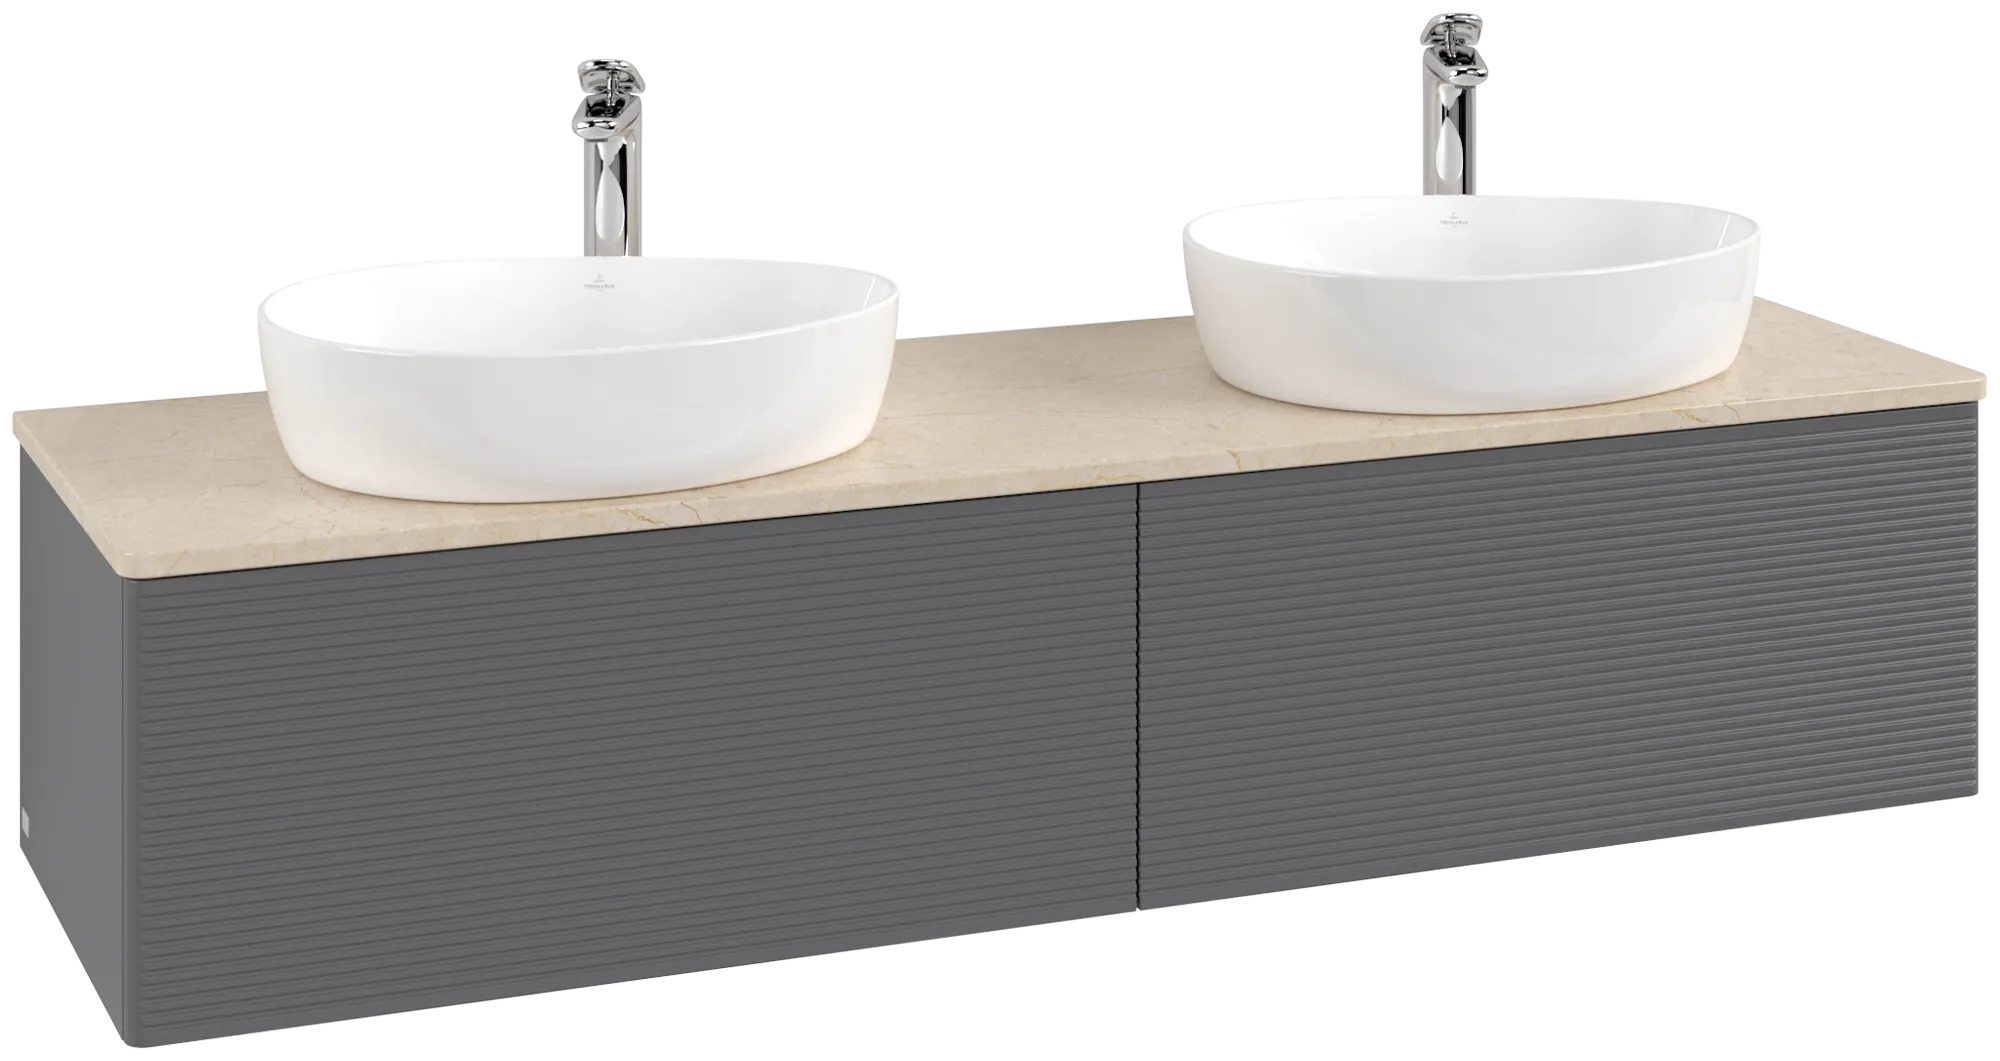 Obrázek VILLEROY BOCH Antao Vanity unit, 2 pull-out compartments, 1600 x 360 x 500 mm, Front with grain texture, Anthracite Matt Lacquer / Botticino #K39153GK